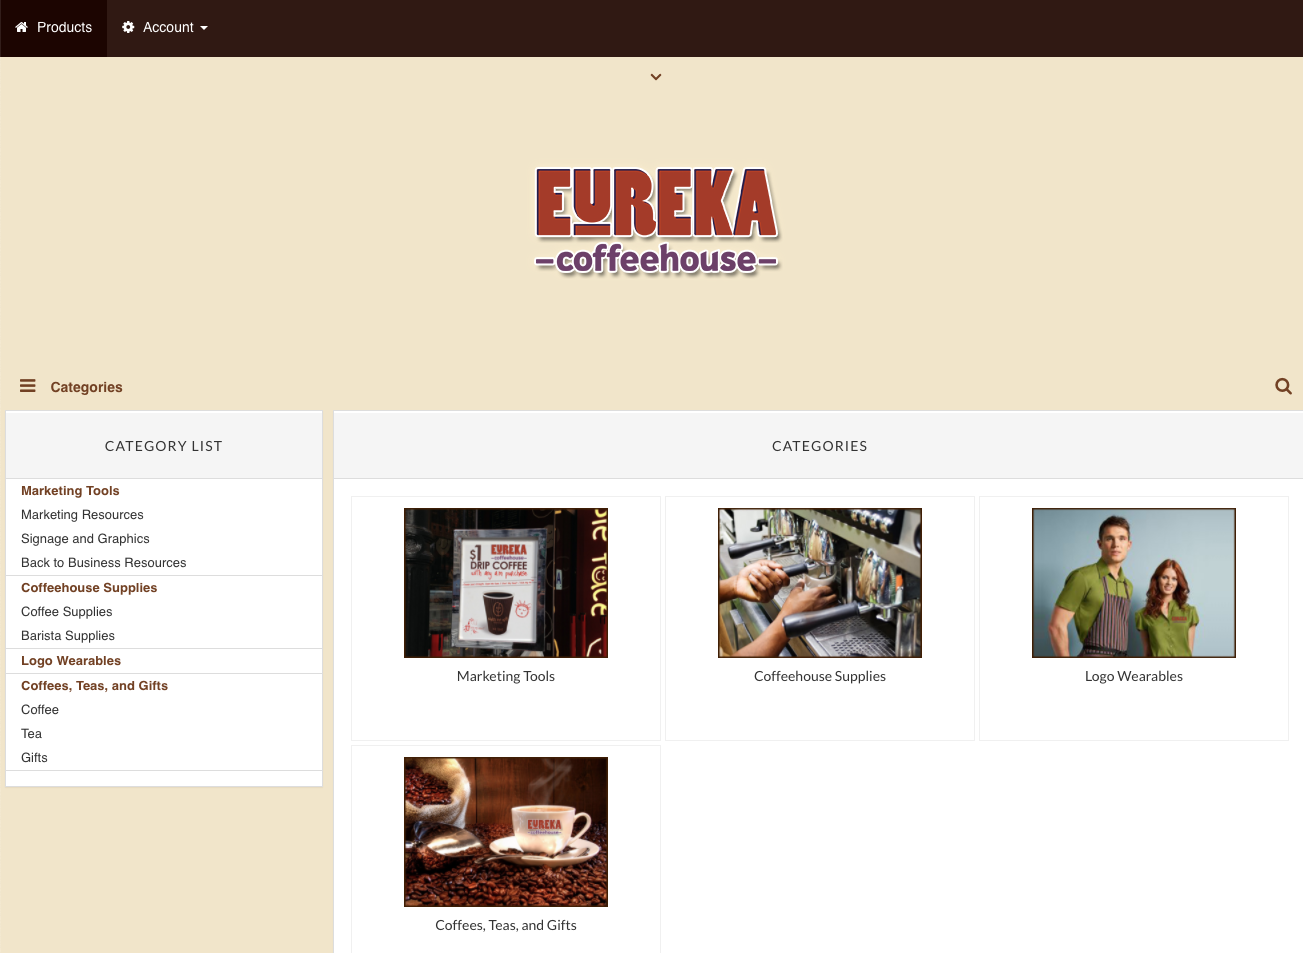 Brand Management Portal for a coffee house